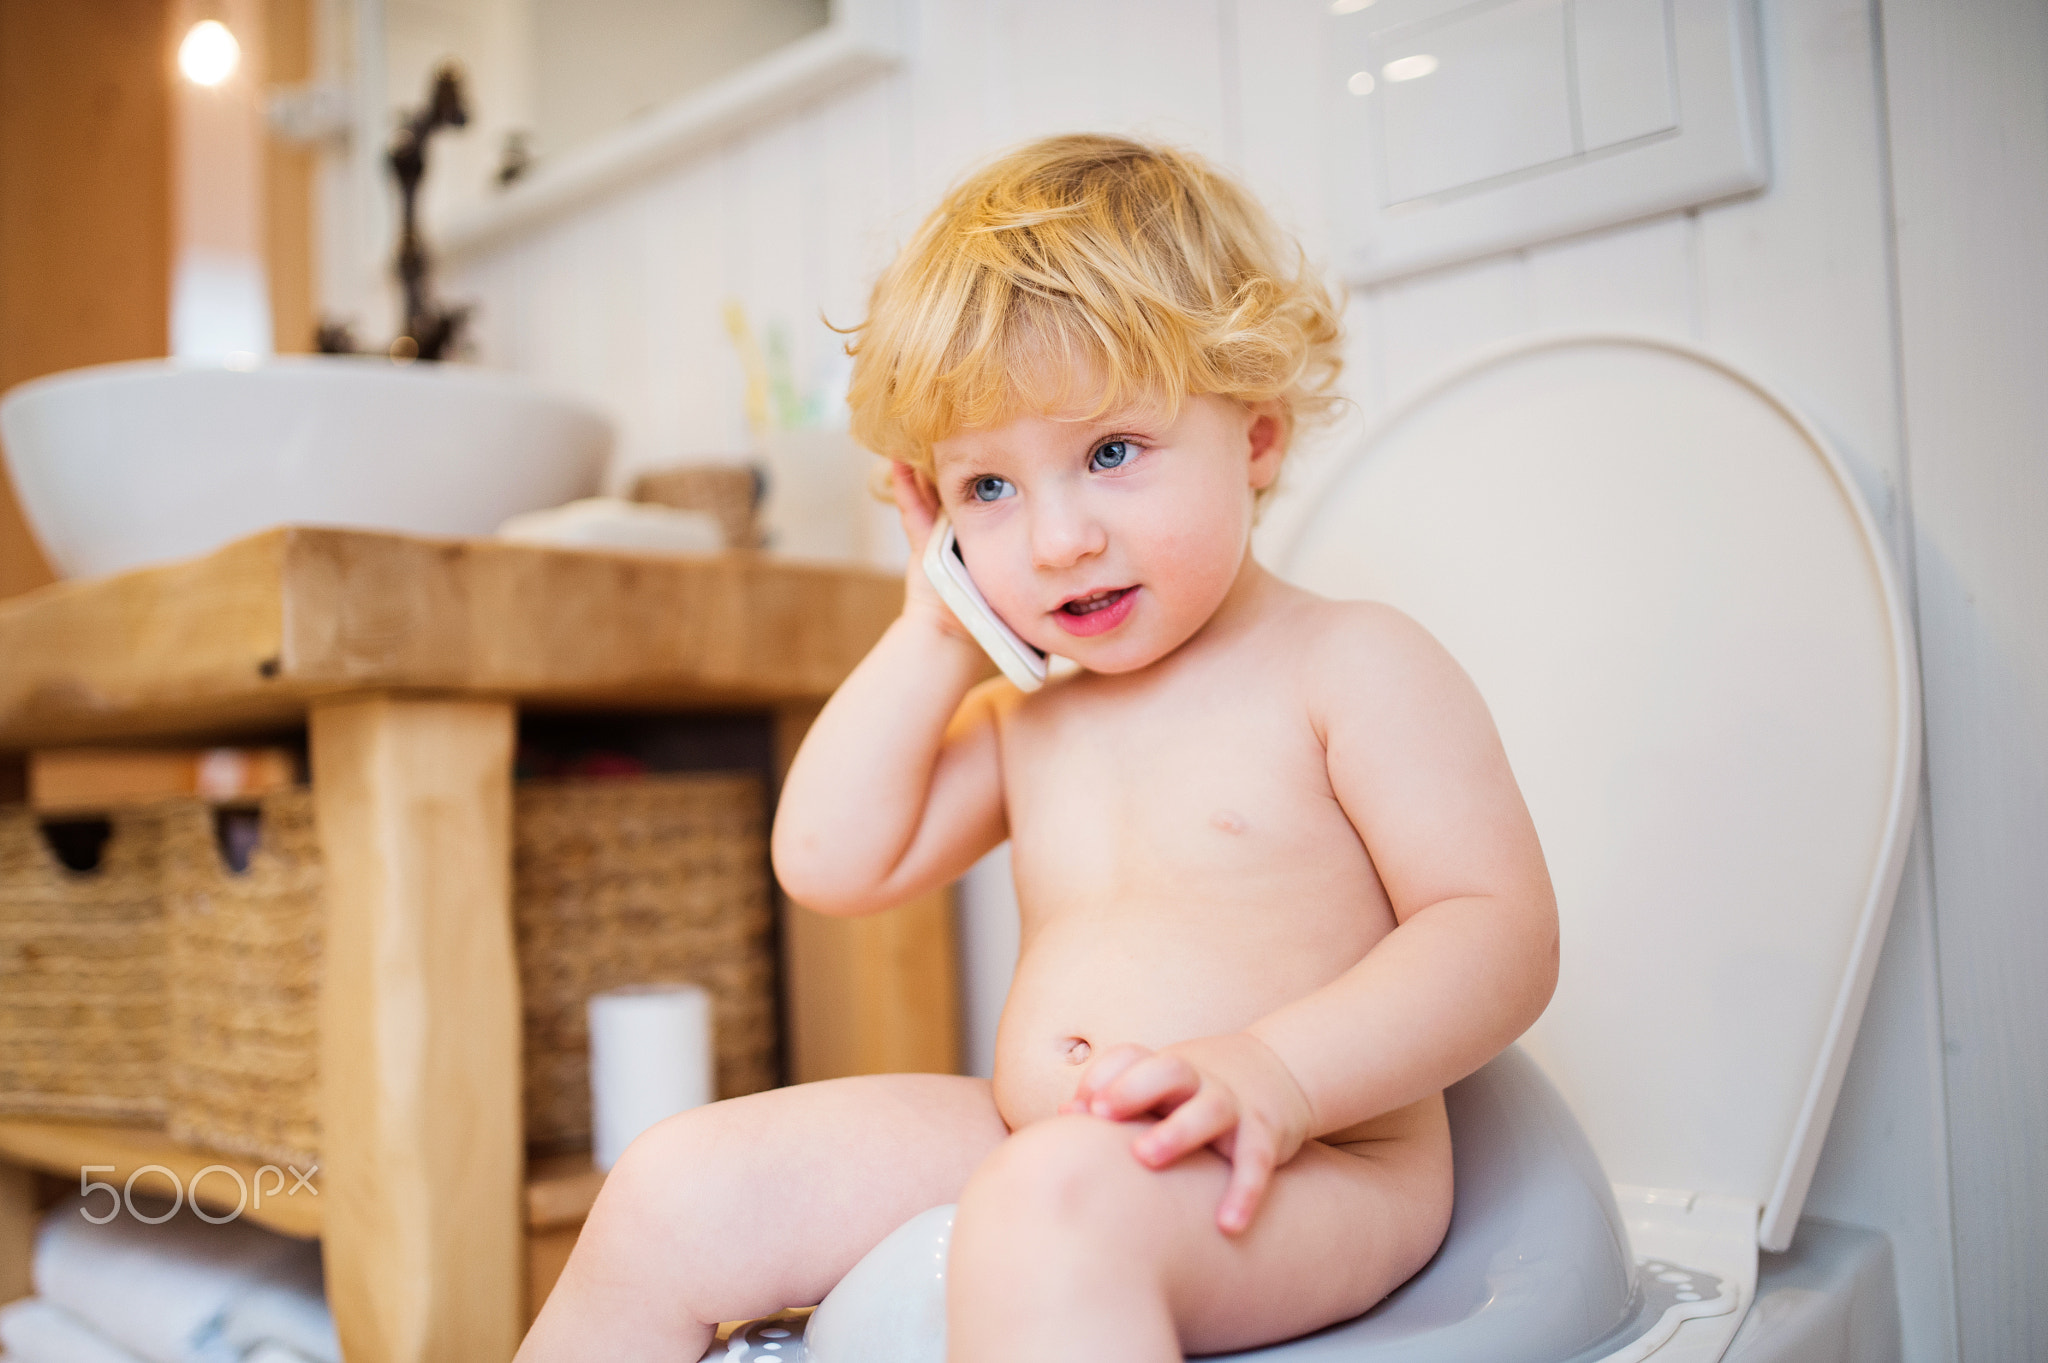 Cute toddler boy with smartphone in the bathroom.